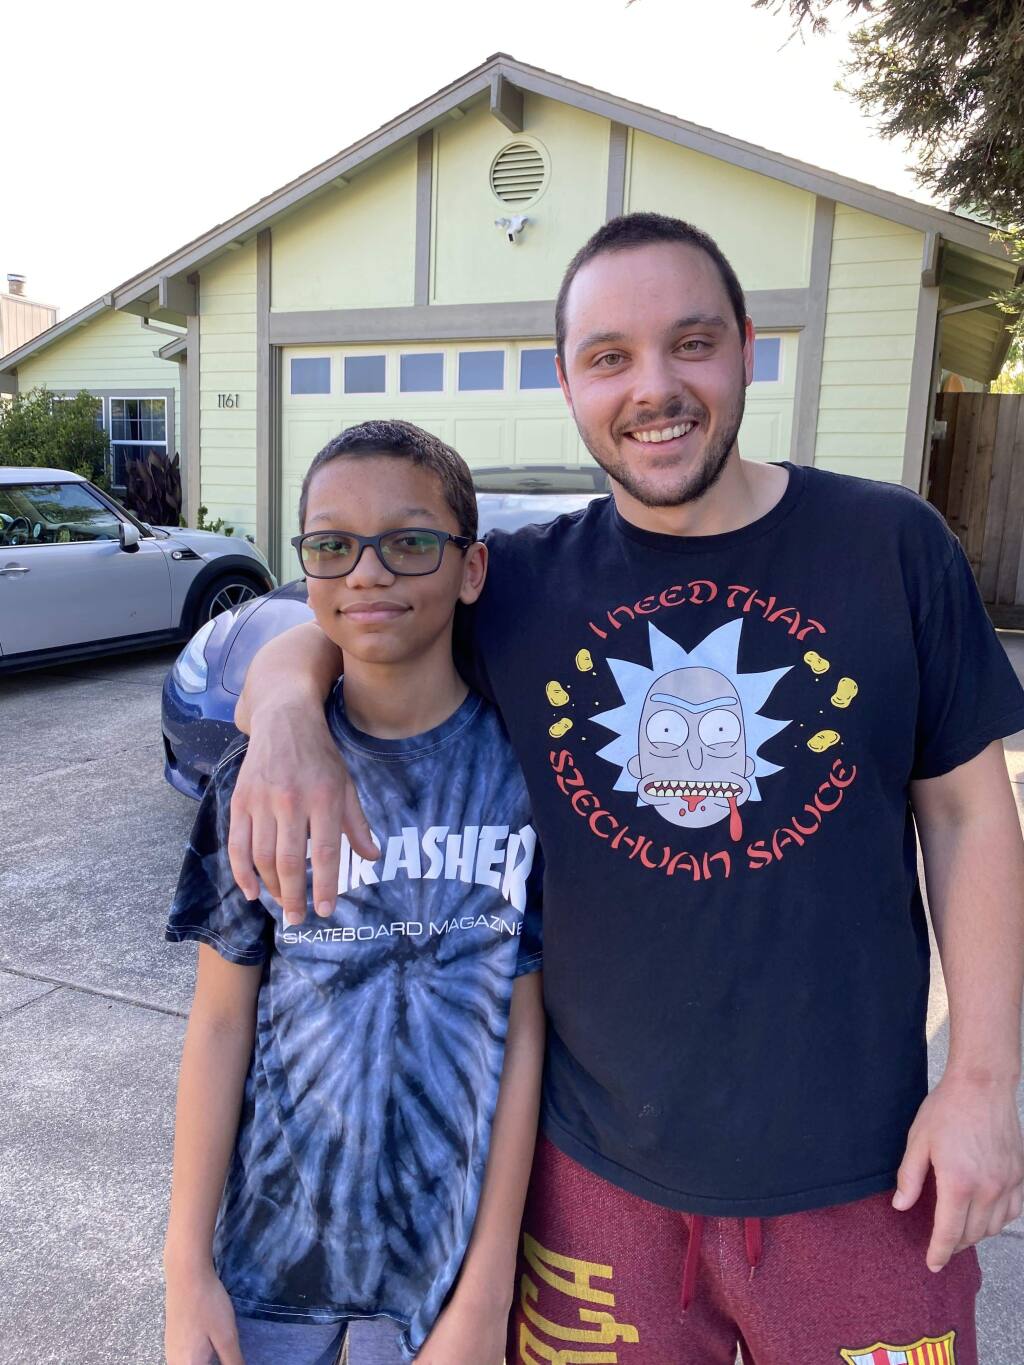 Markus Wright, left, poses for a photo with Cosmo Sutcliffe after Wright's mother, Melany Collett, not pictured, cut their hair in her garage in Santa Rosa. (Melany Collett)